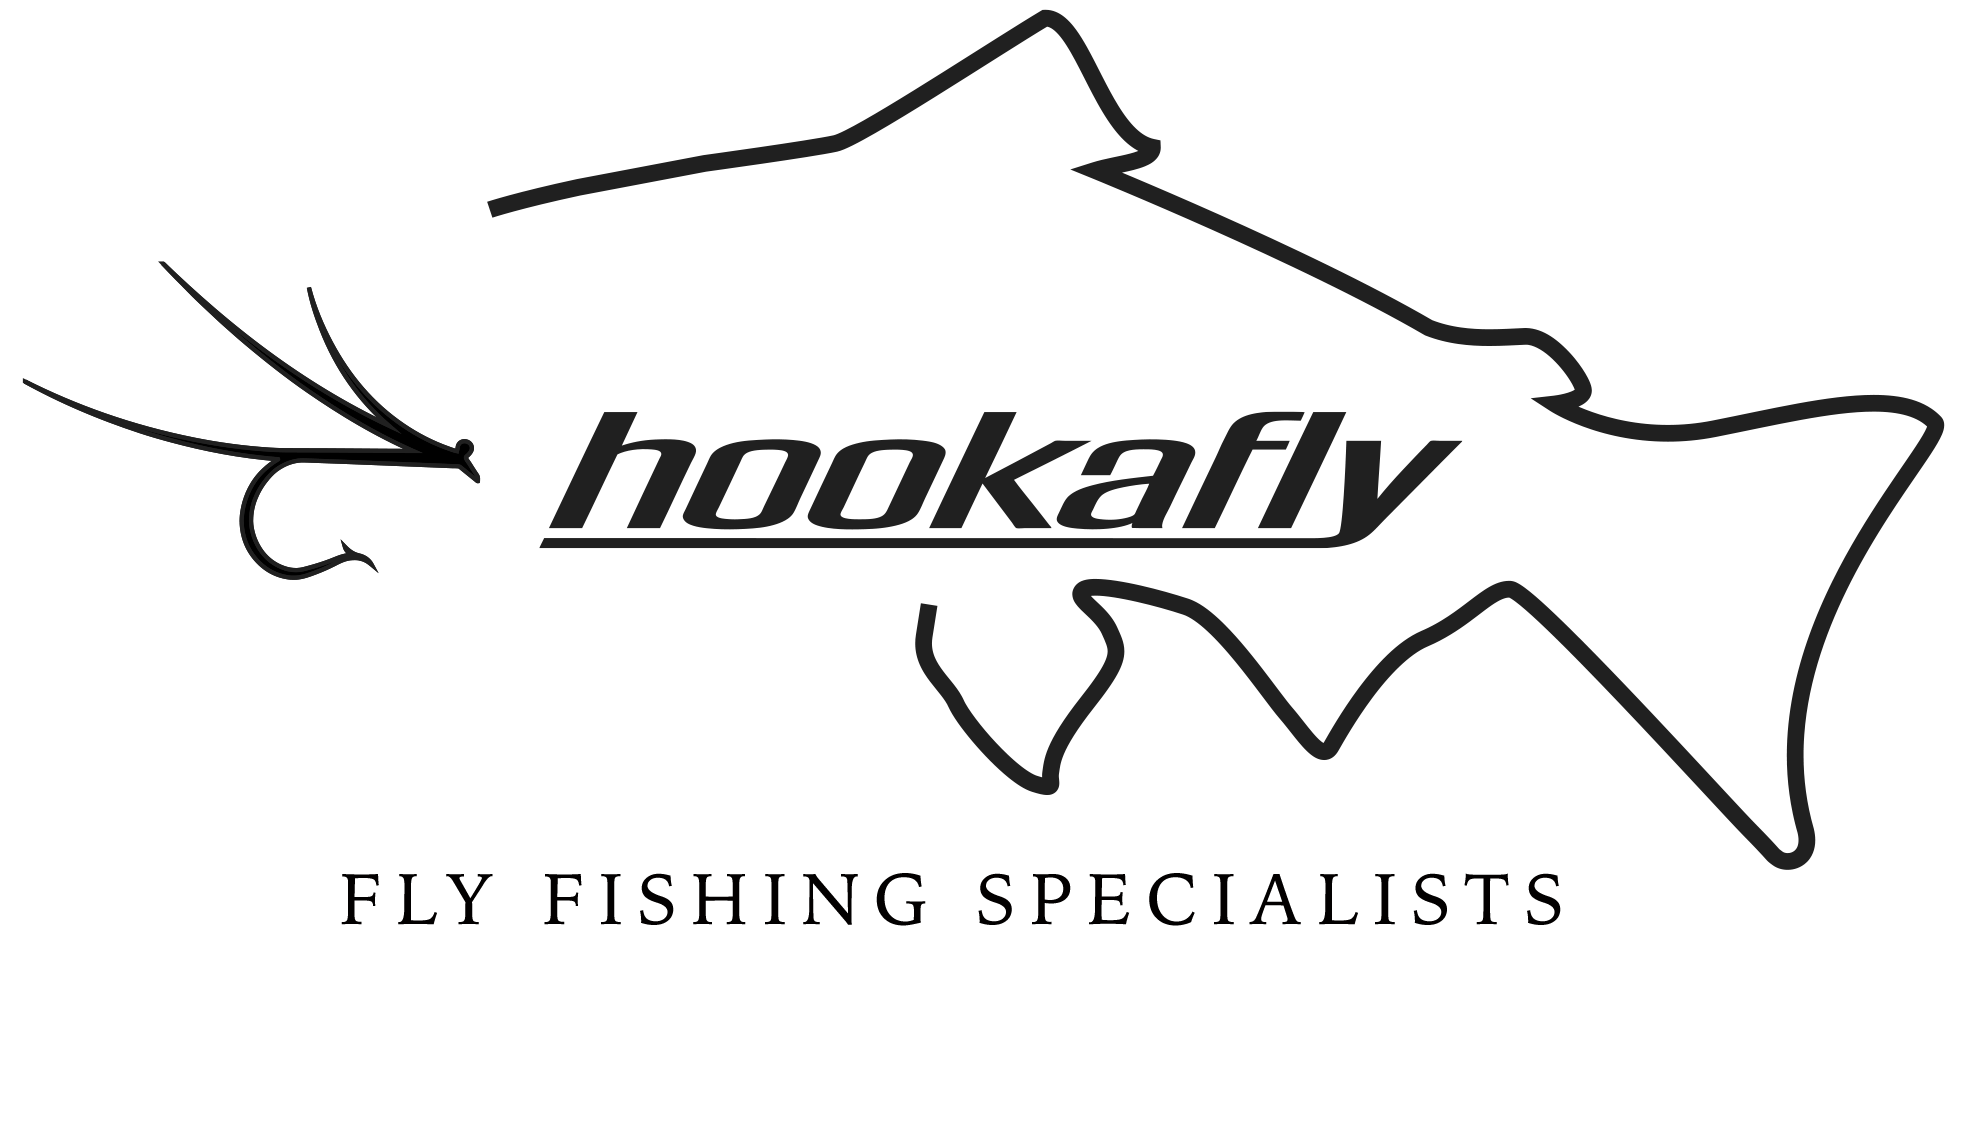 hookafly_fish-design copy.png